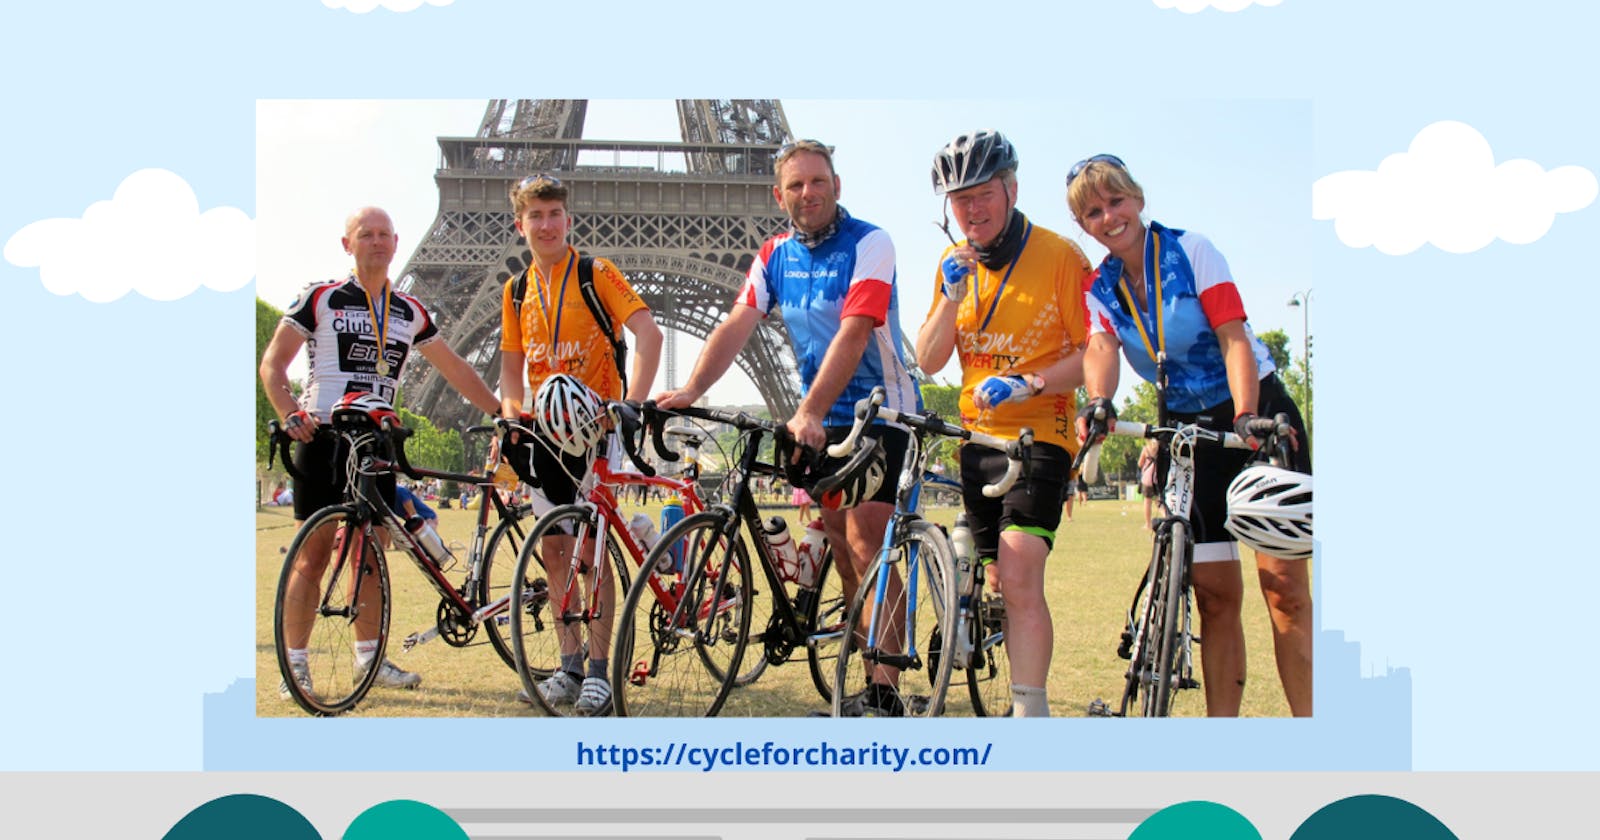 Cycling for a Purpose: A Great Purpose Cycle Ride from London to Paris